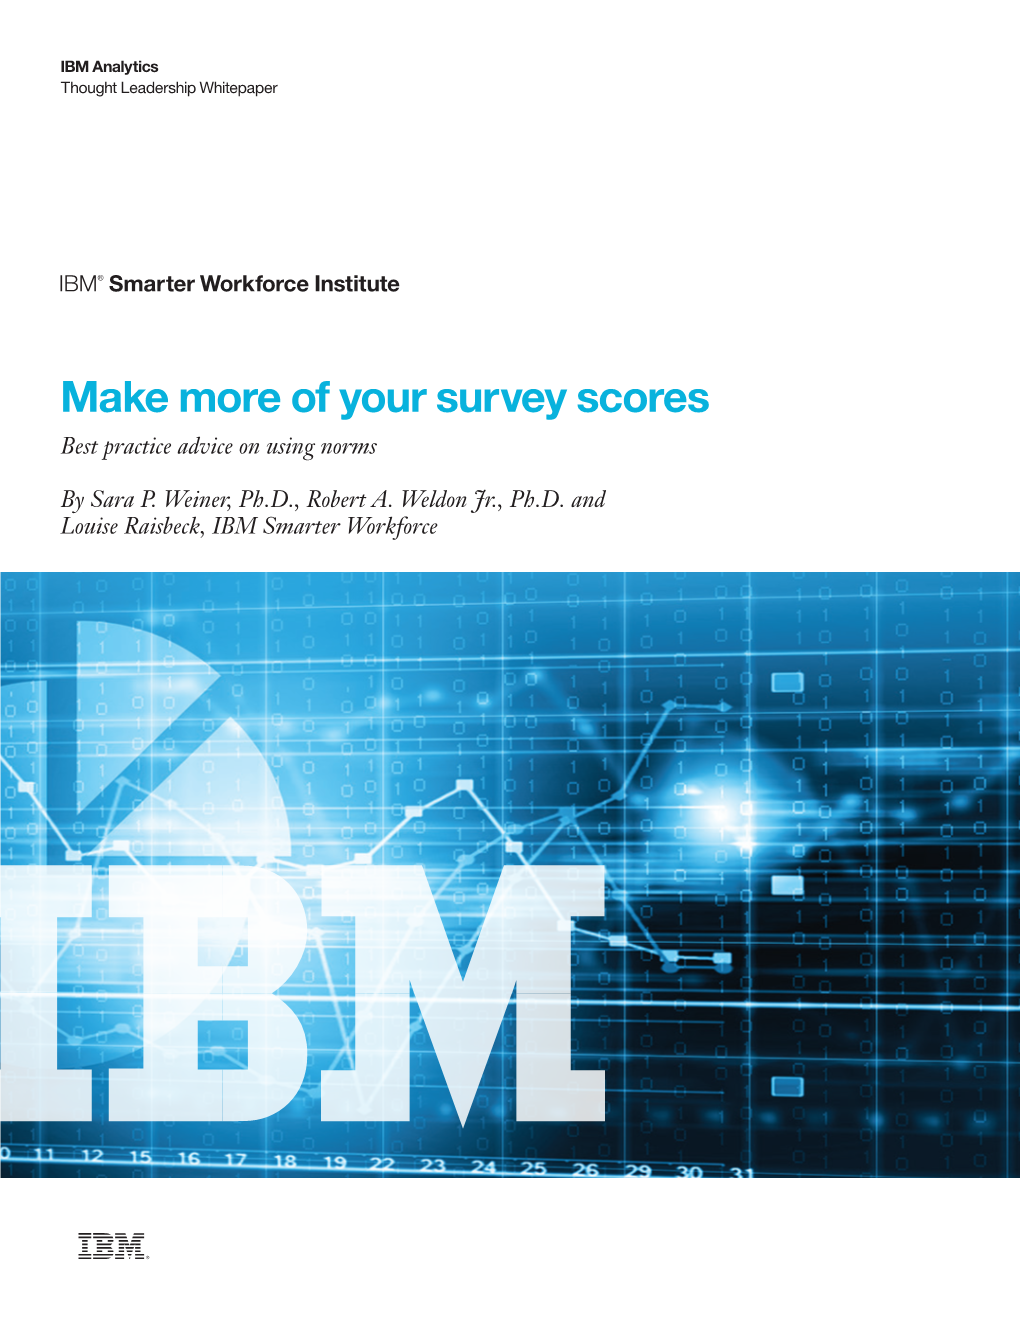 Make More of Your Survey Scores Best Practice Advice on Using Norms